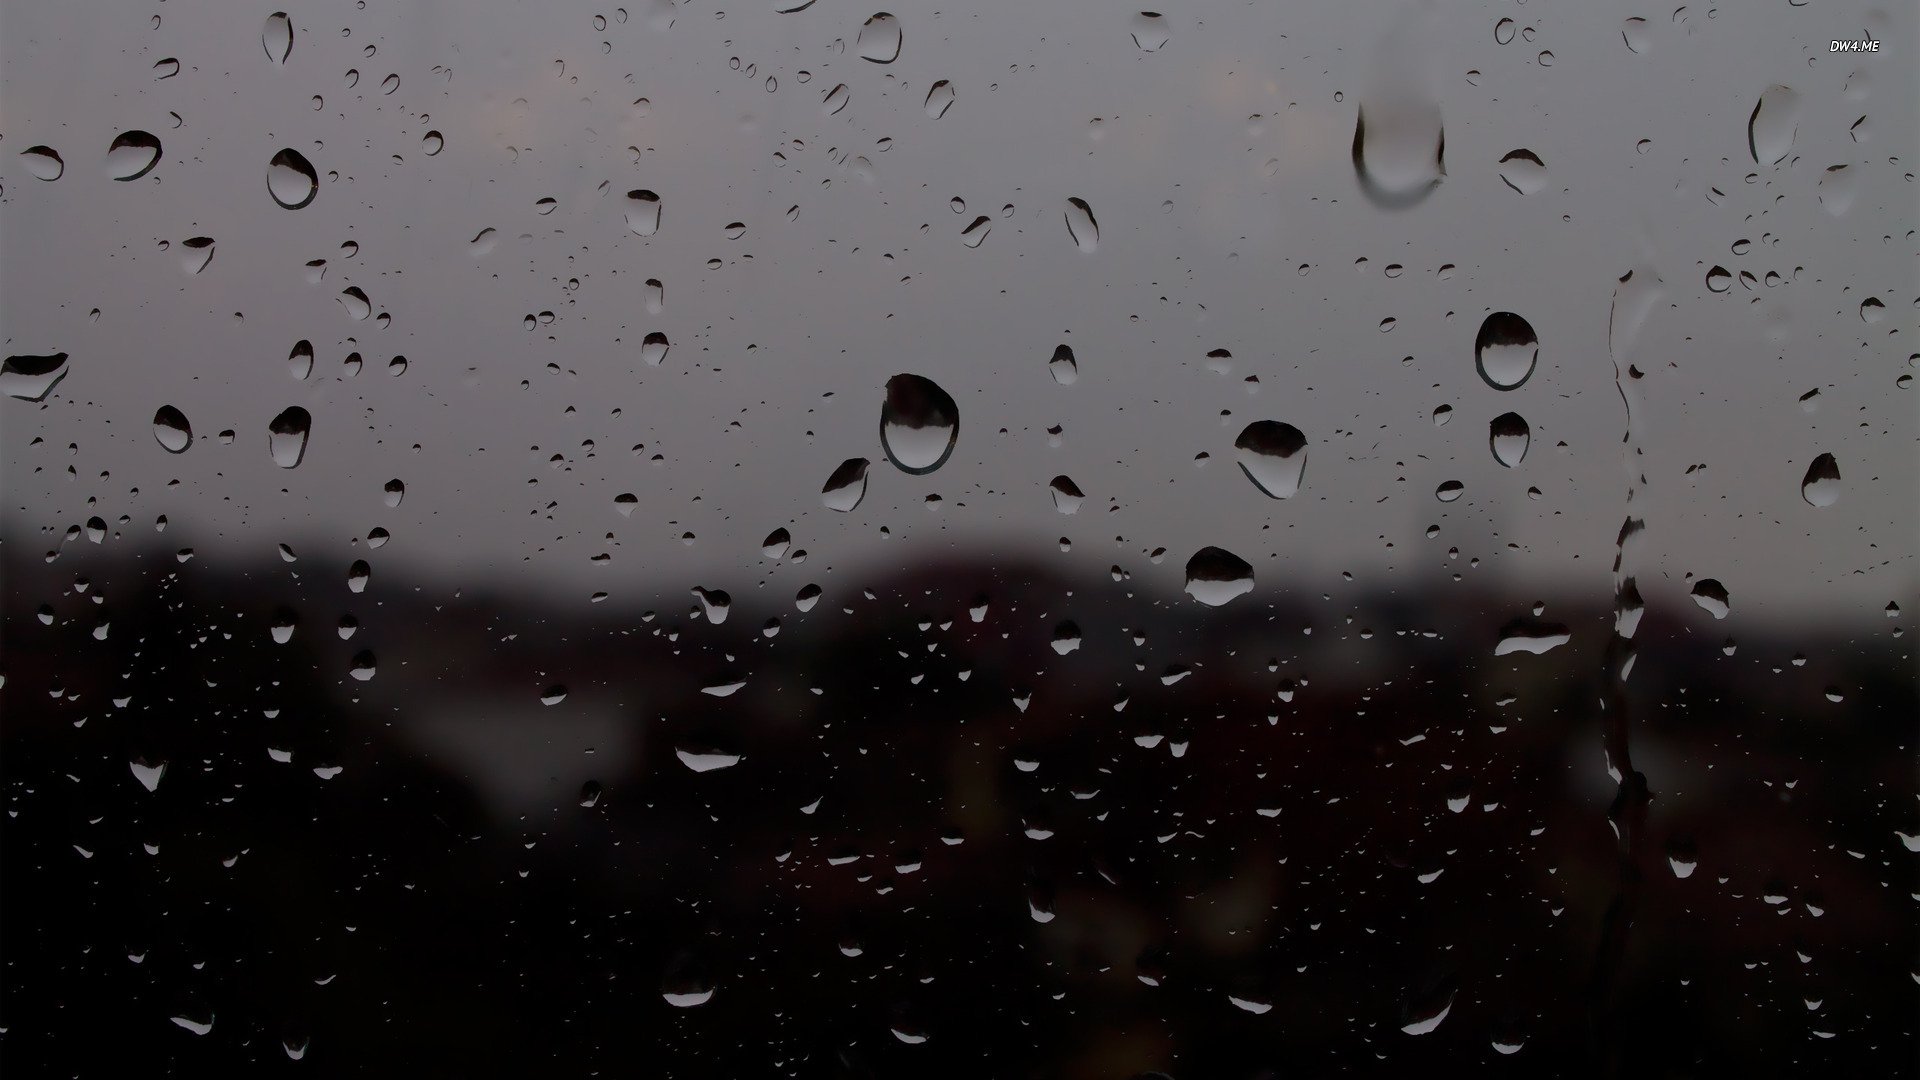 Raindrops on the window wallpaper   Photography wallpapers   587